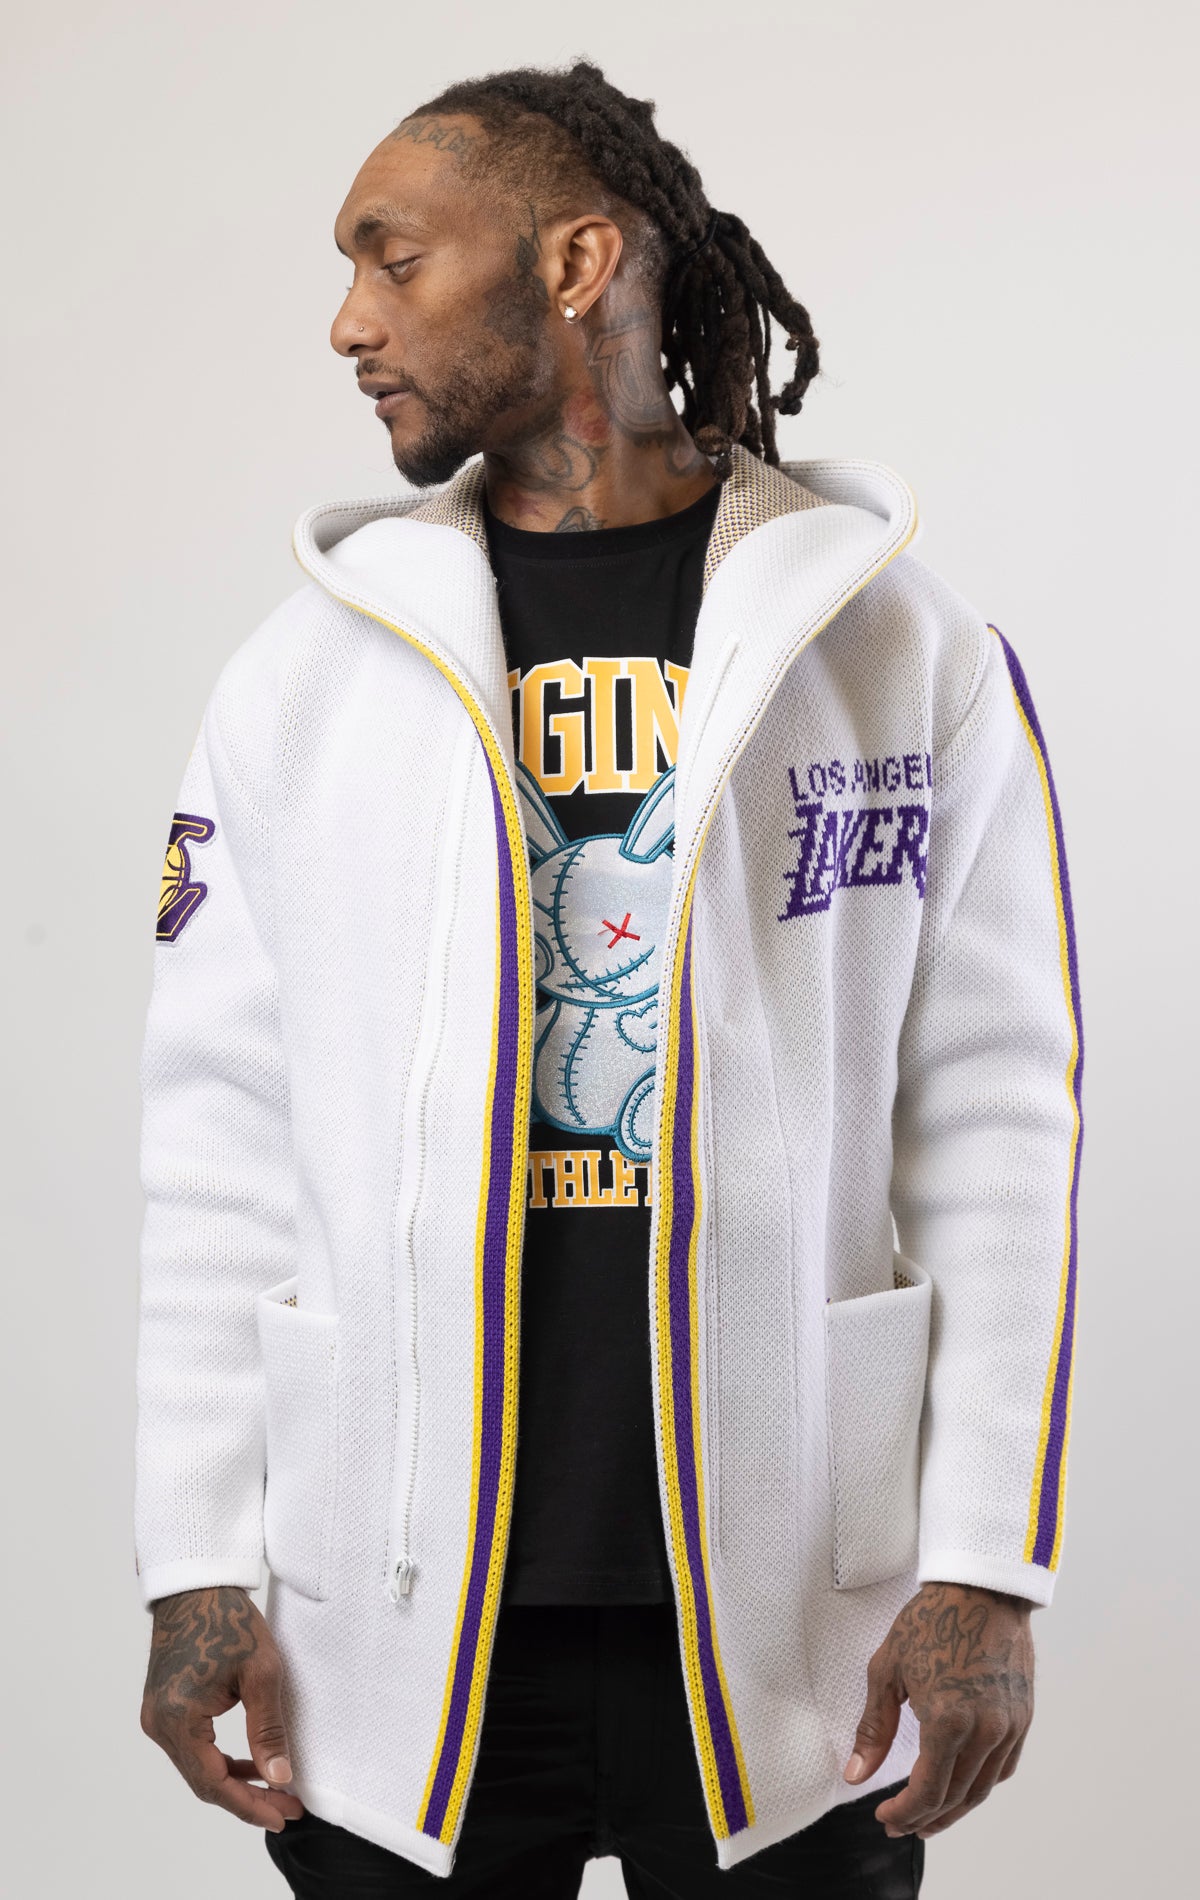 White LA LAKERS Cardigan Sweater. This cozy jacket is designed with a stylish three-quarter length and boasts bold team branding on the front, back, and sleeve. Complete with a full-zip closure, attached hood, and front pockets, this knit sweater offers both comfort and style.